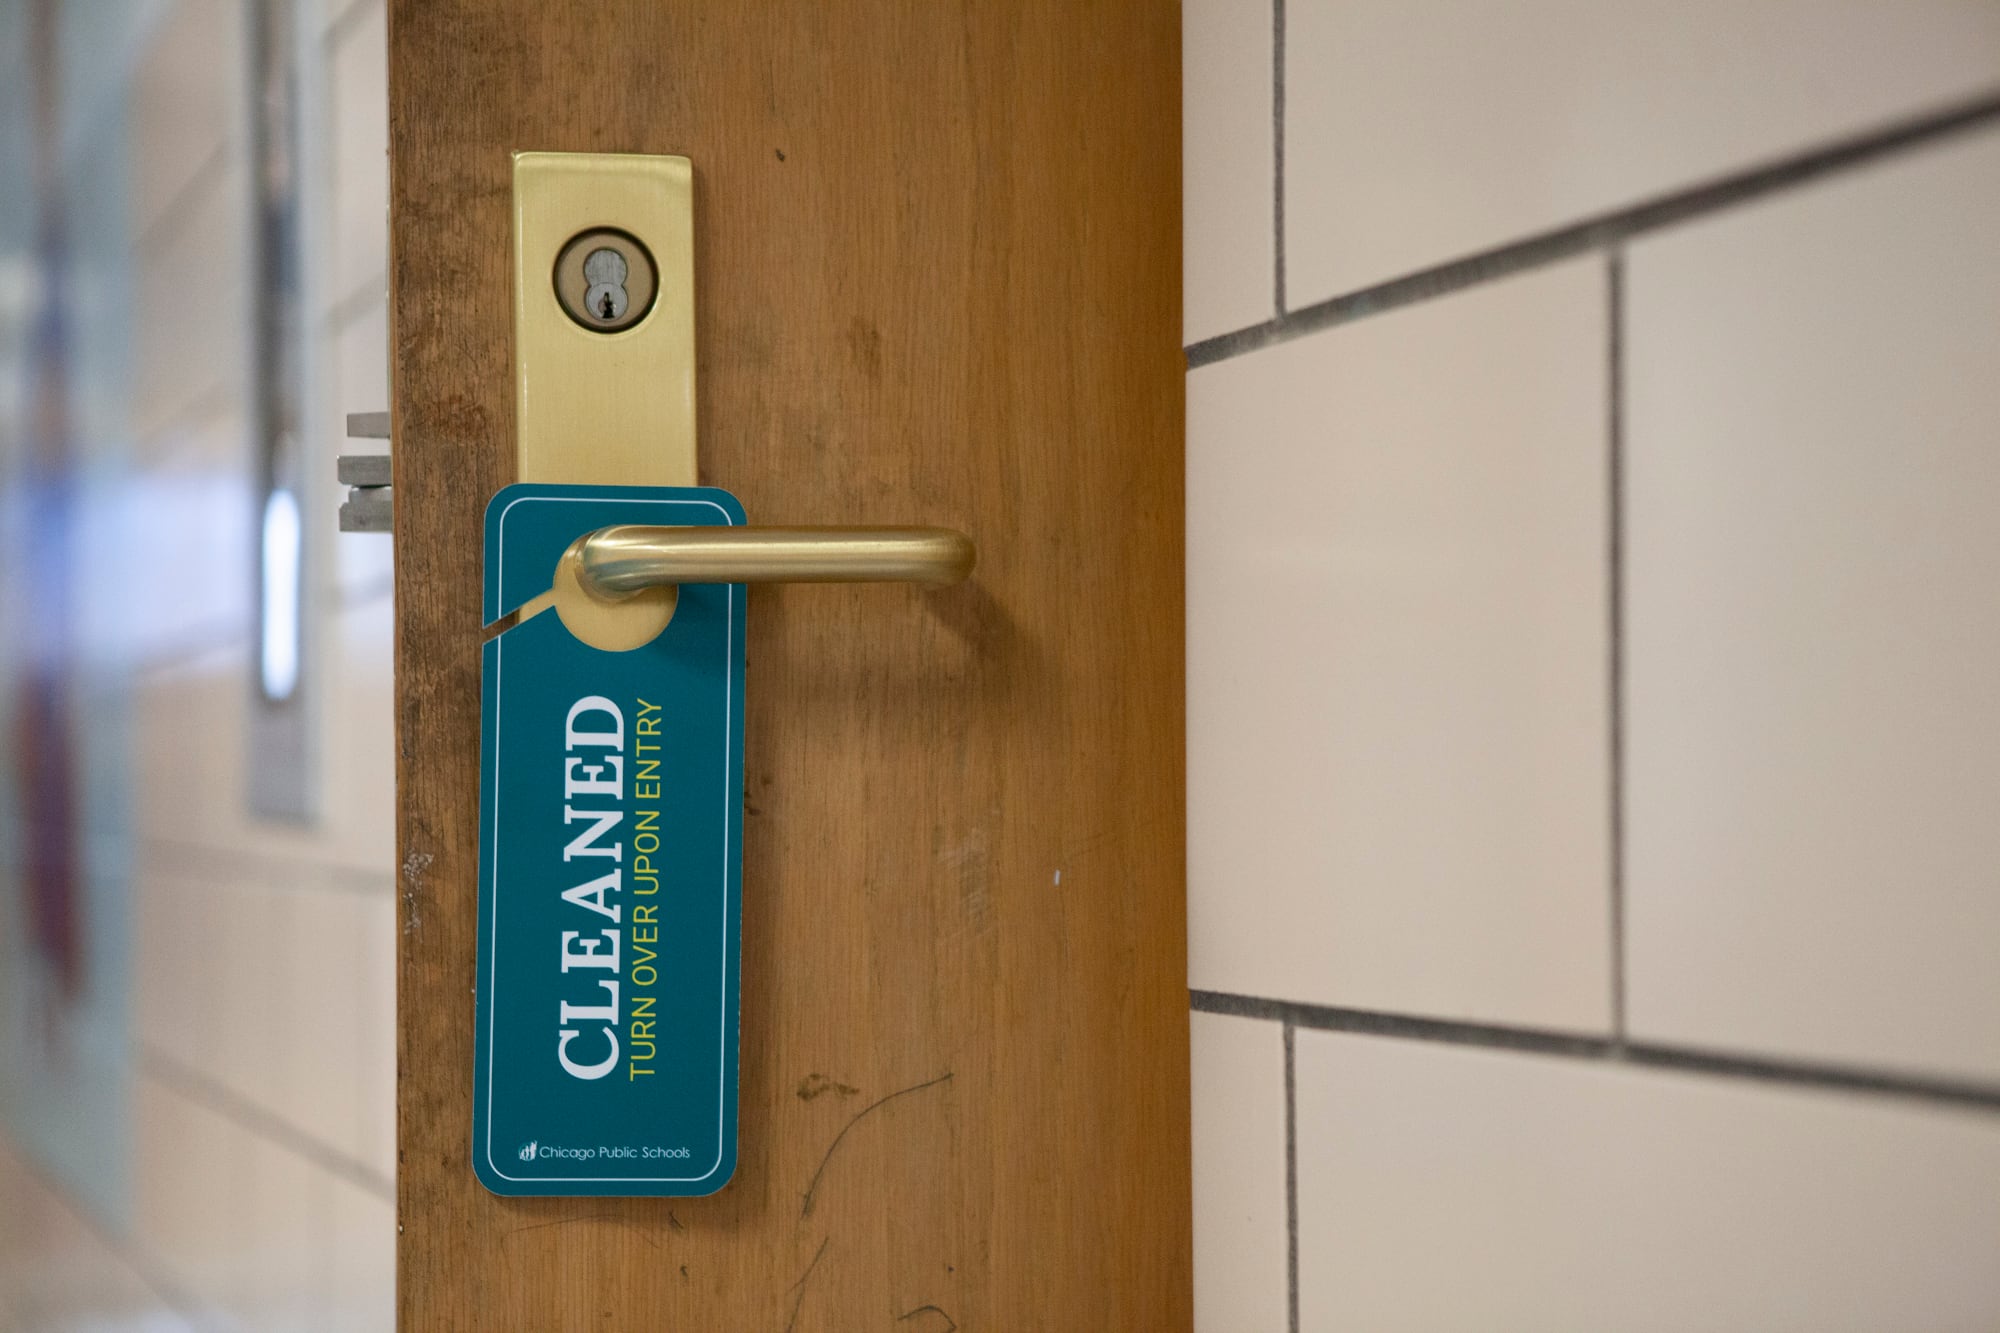 A sign hanging on a doorknob that indicates that the room has recently been cleaned.